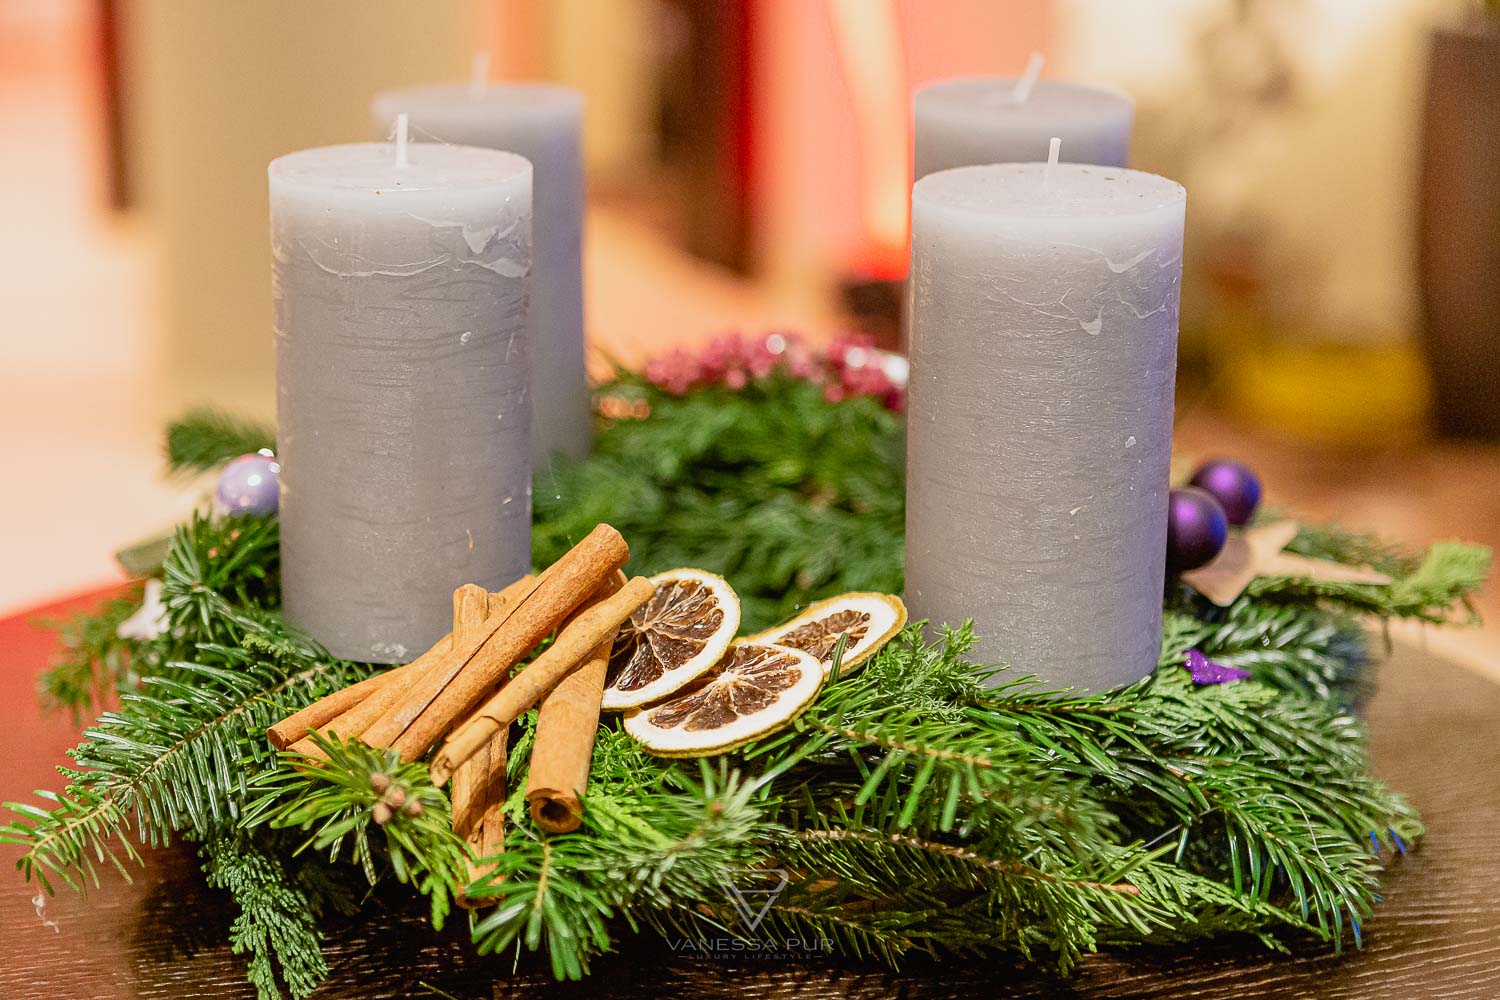 How to get into Christmas spirit? Get merry for Christmas - Advent wreath ideas and instructions for crafting